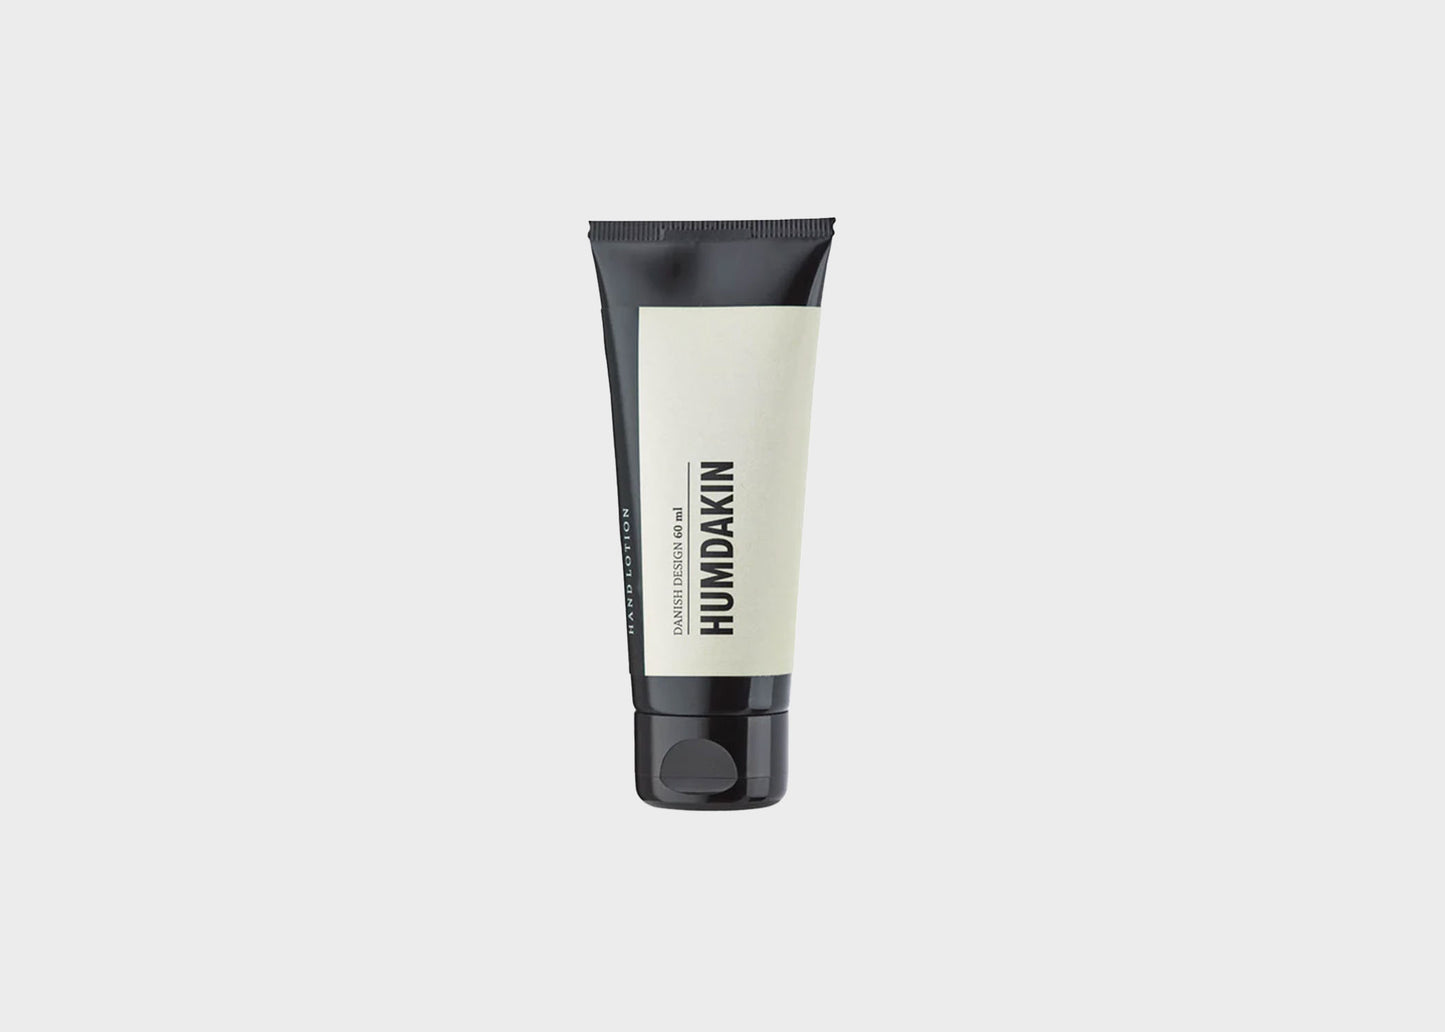 Humdakin Hand Lotion 60ml as sold by Woodland Mod